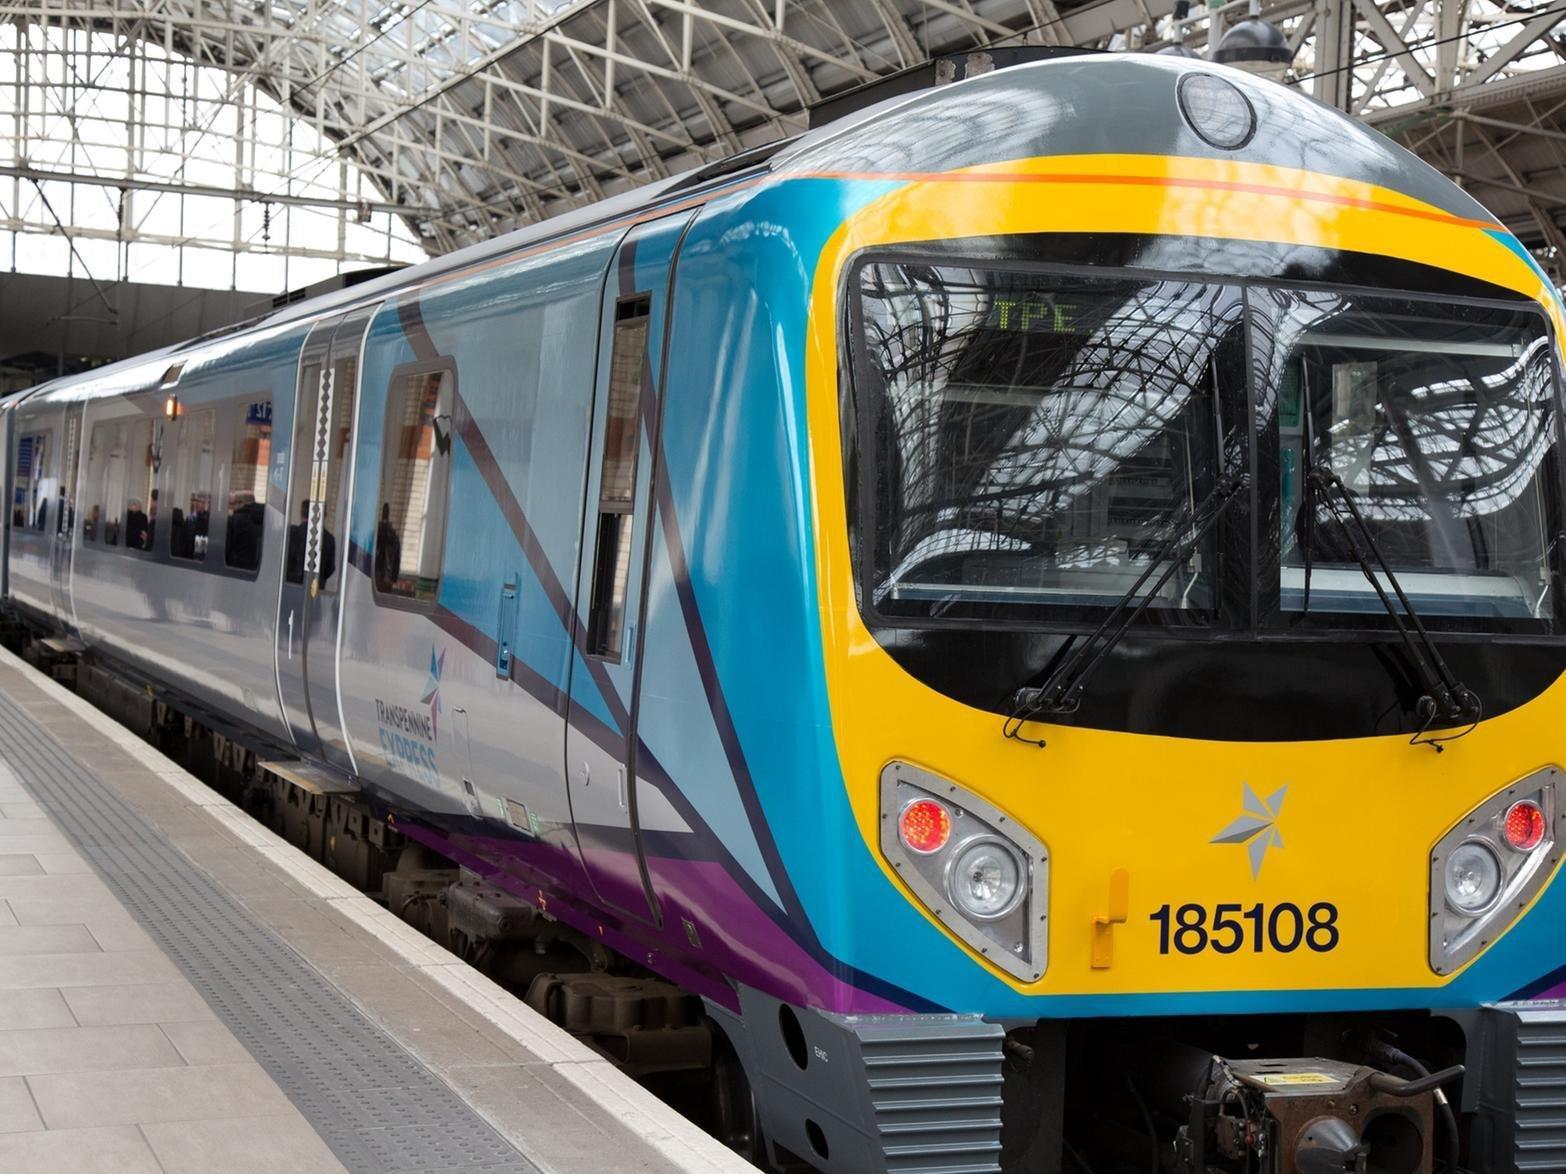 TransPennine Express train strike dates: Manchester, Leeds, York and Sheffield routes among those affected